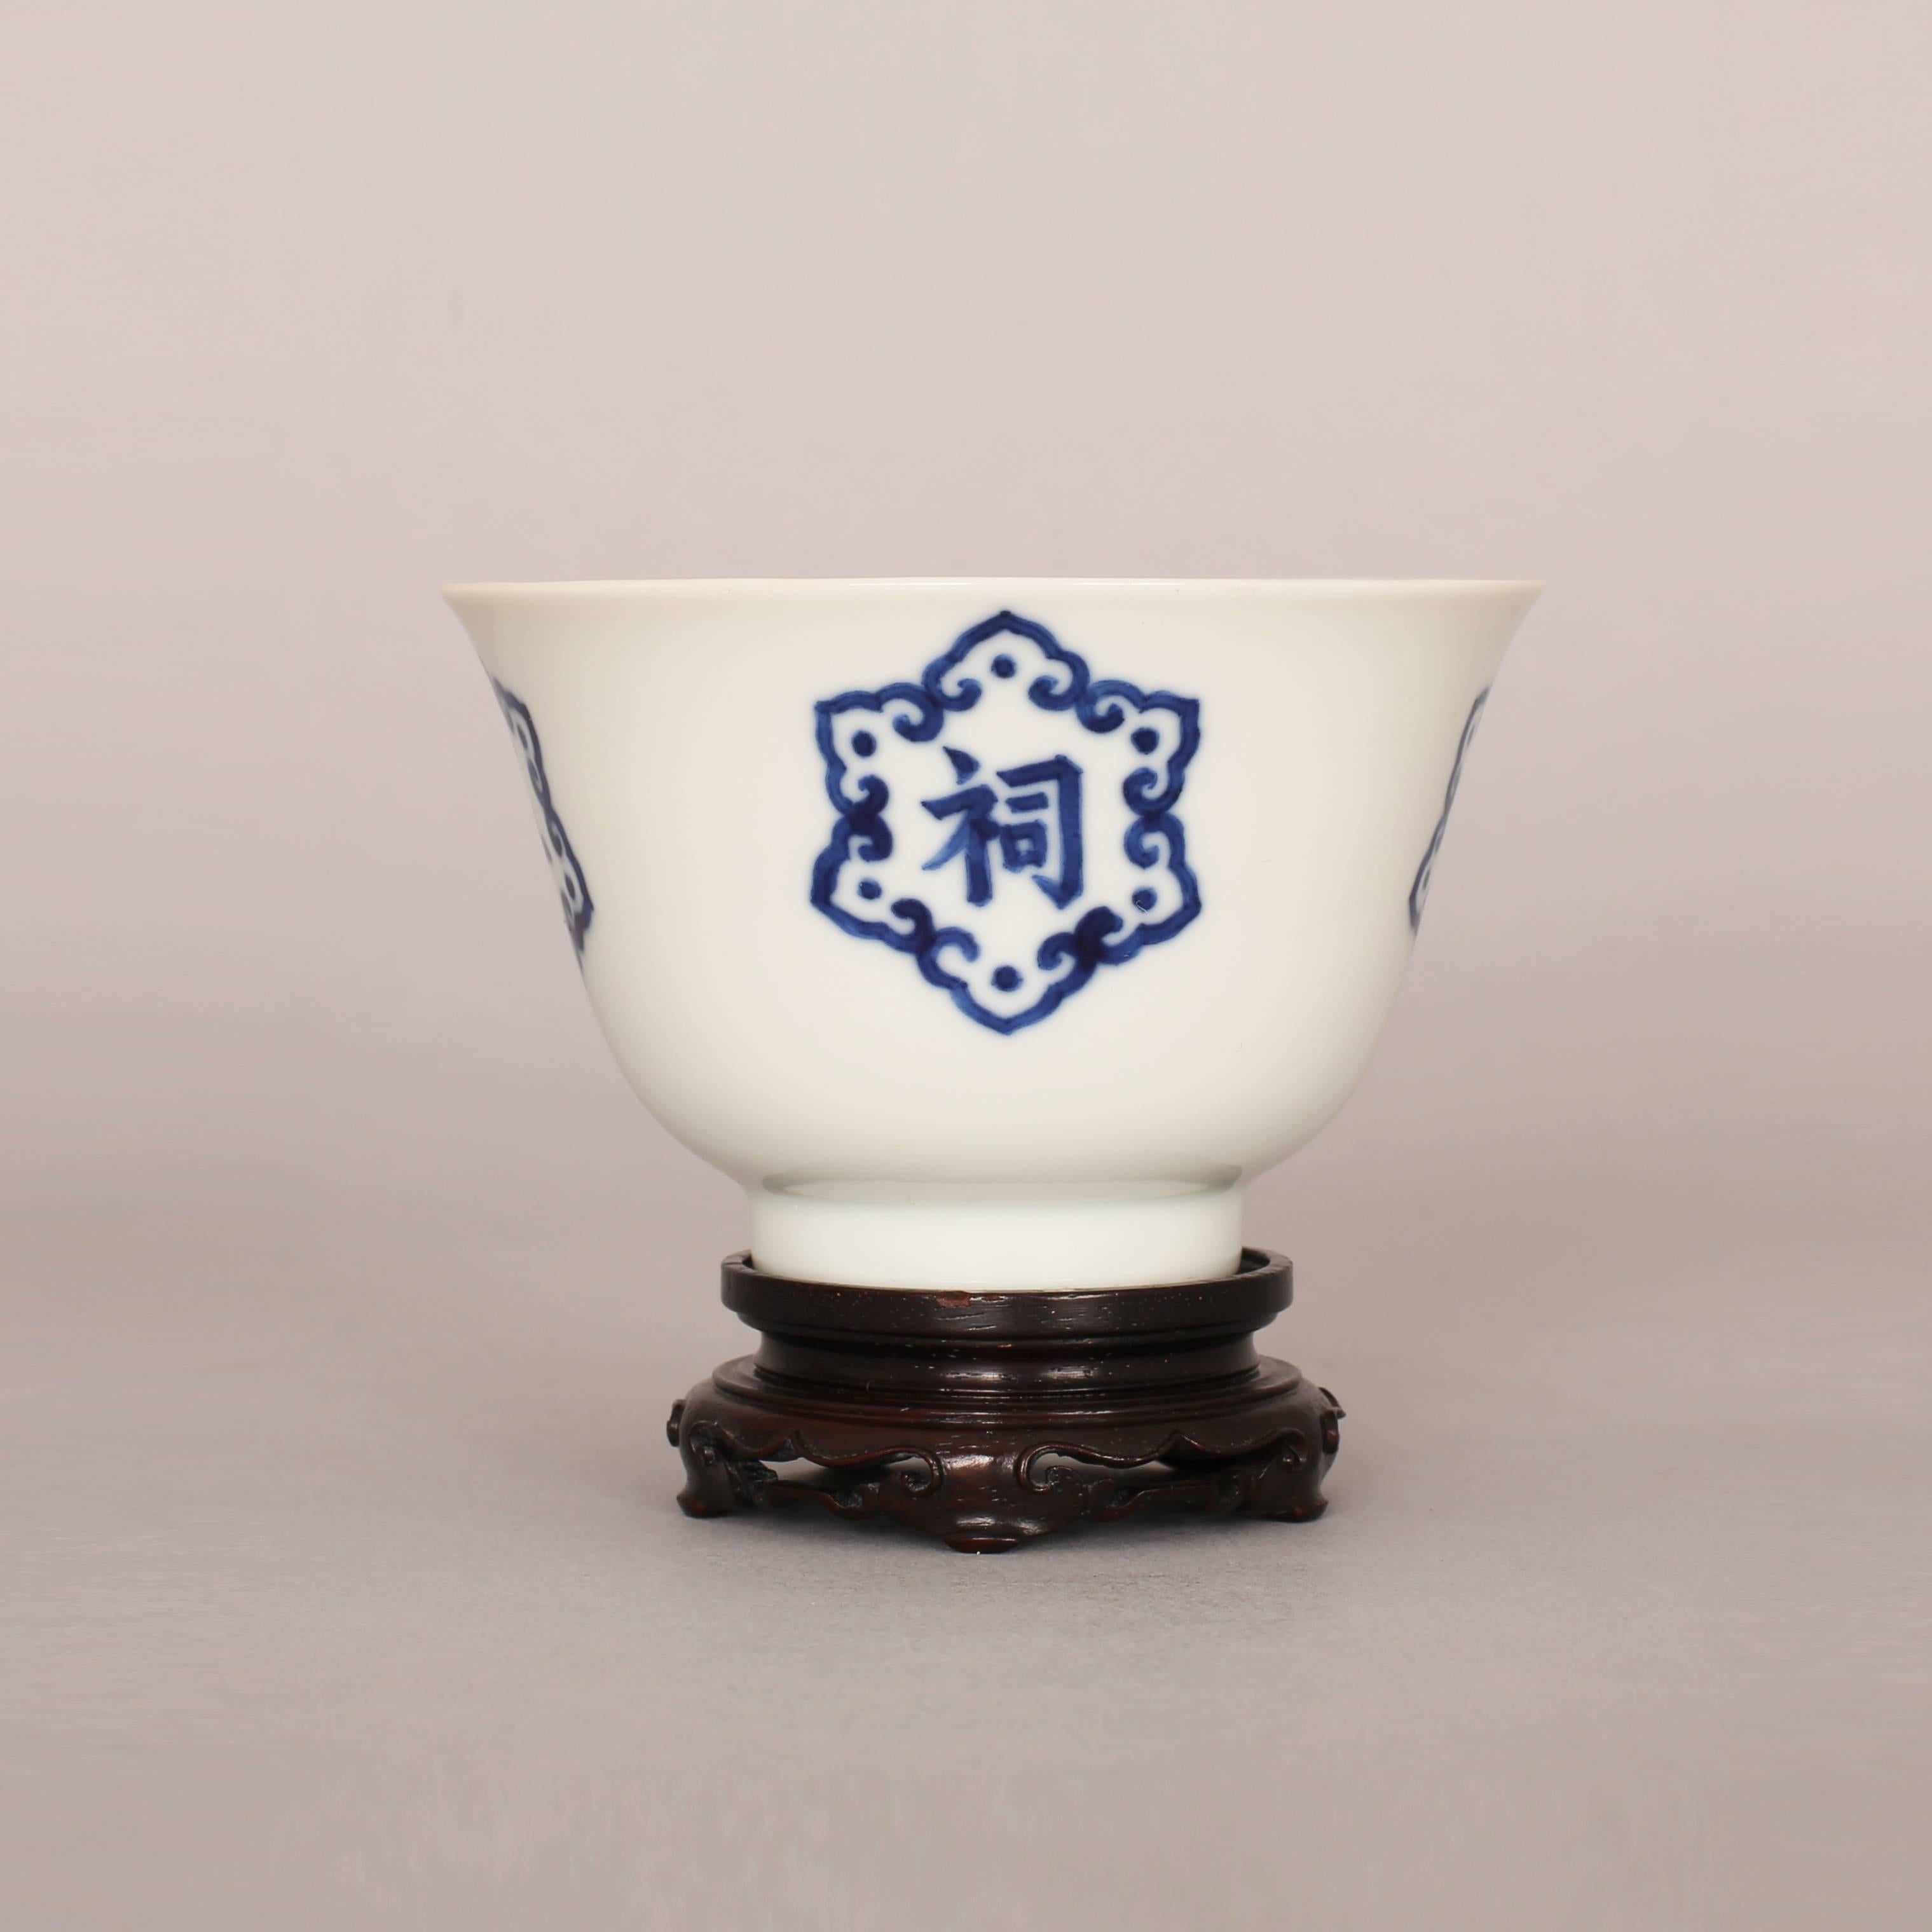 A Chinese porcelain blue and white wine cup with gently flared lip, painted with four six sided ruyi-head emblems containing ‘Wu Shi Zong Ci’ characters, the interior with a stylized decorative shou character, the underside with a six character mark